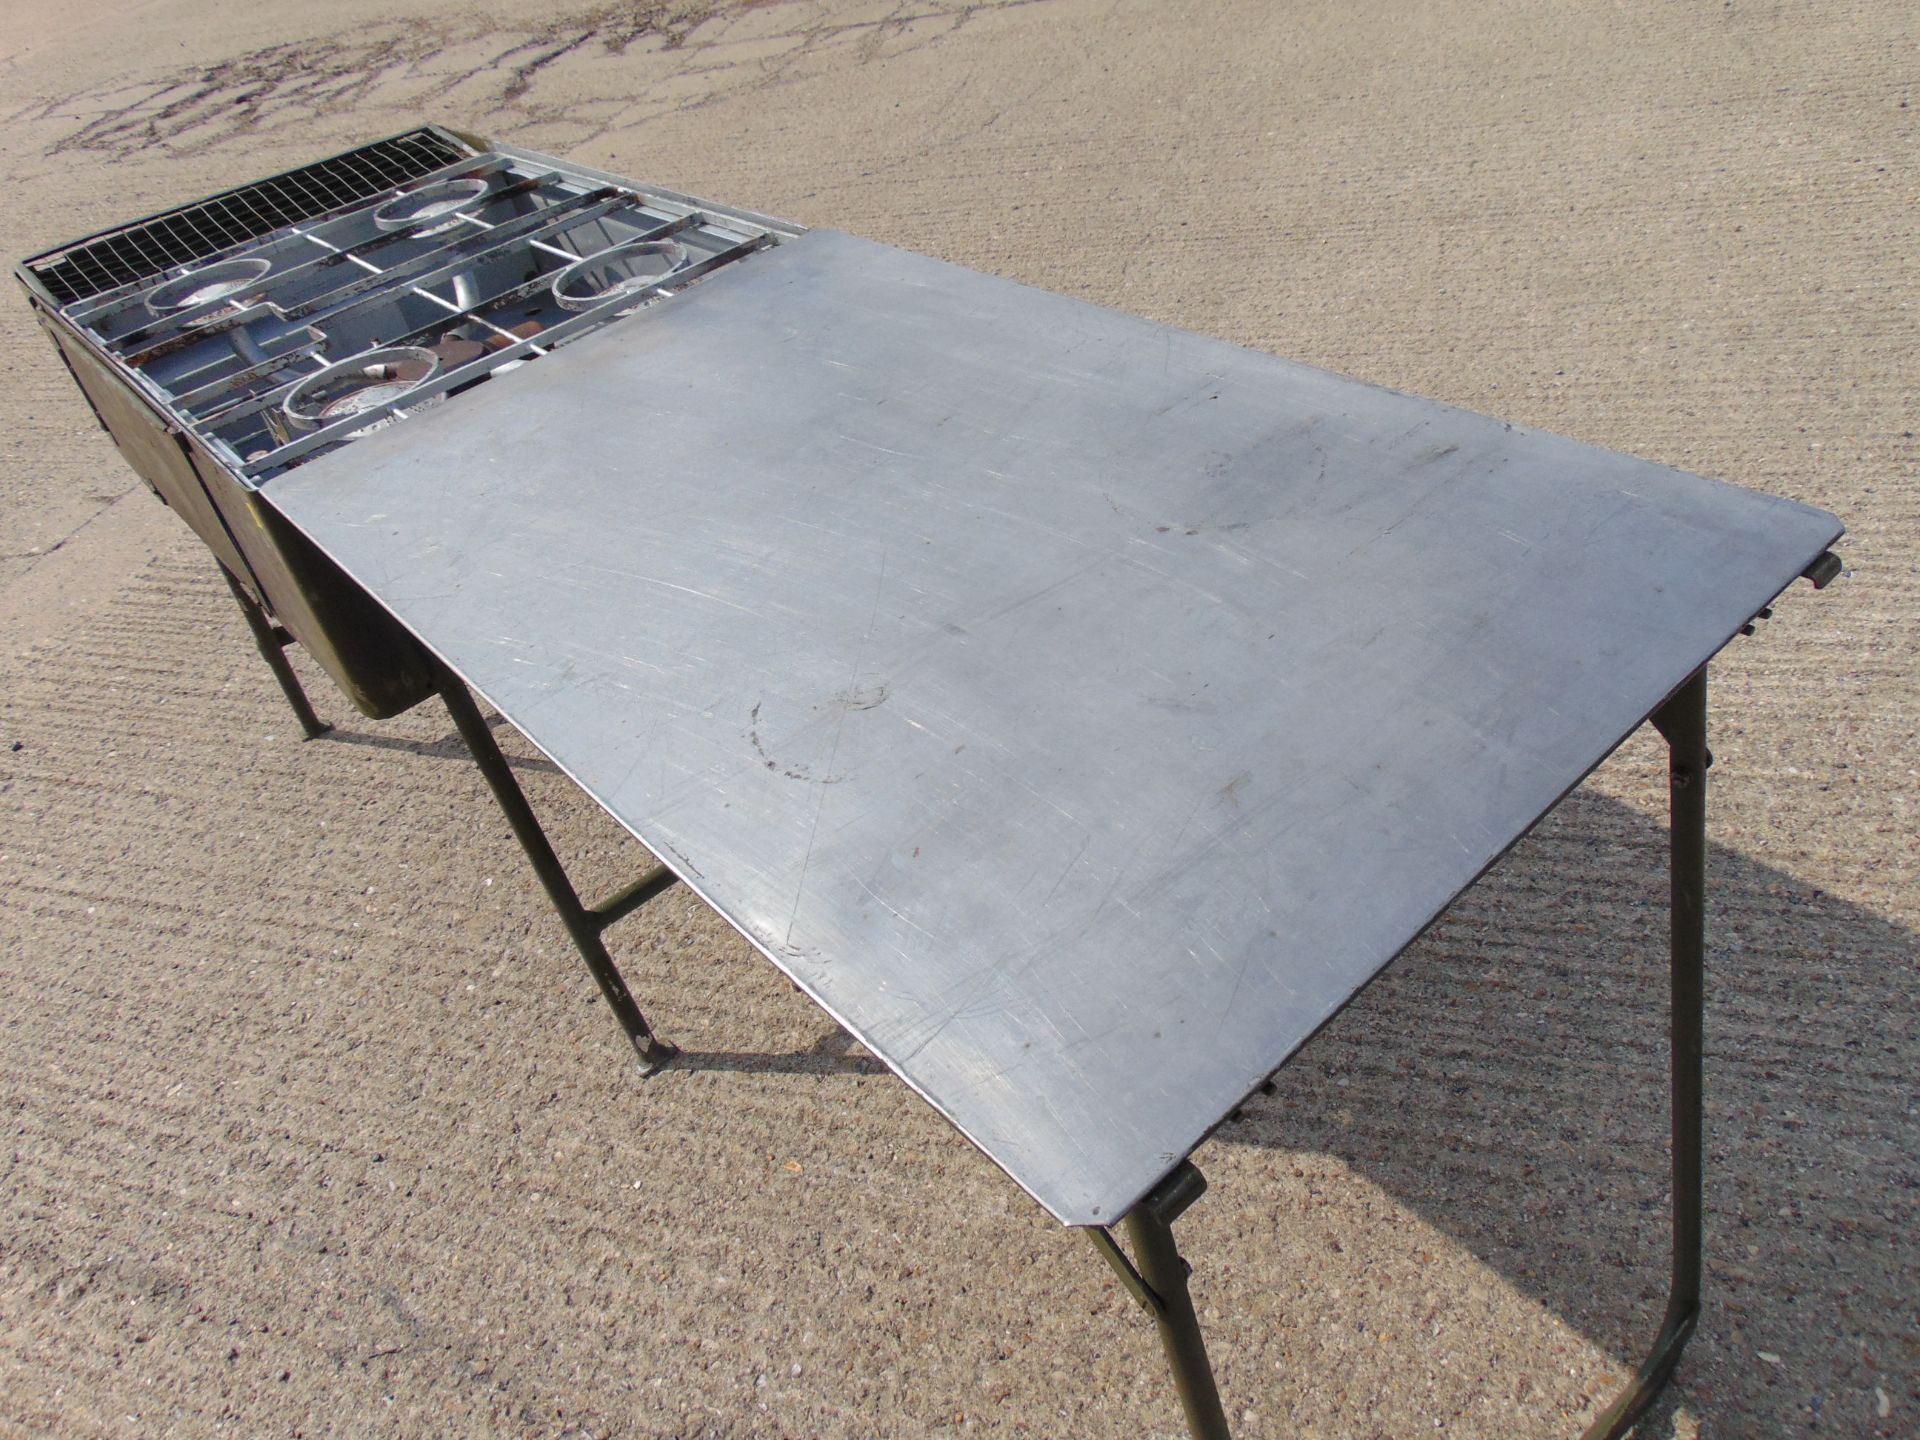 Field Kitchen No5 4 Burner Propane Cooking Stove - Image 5 of 9